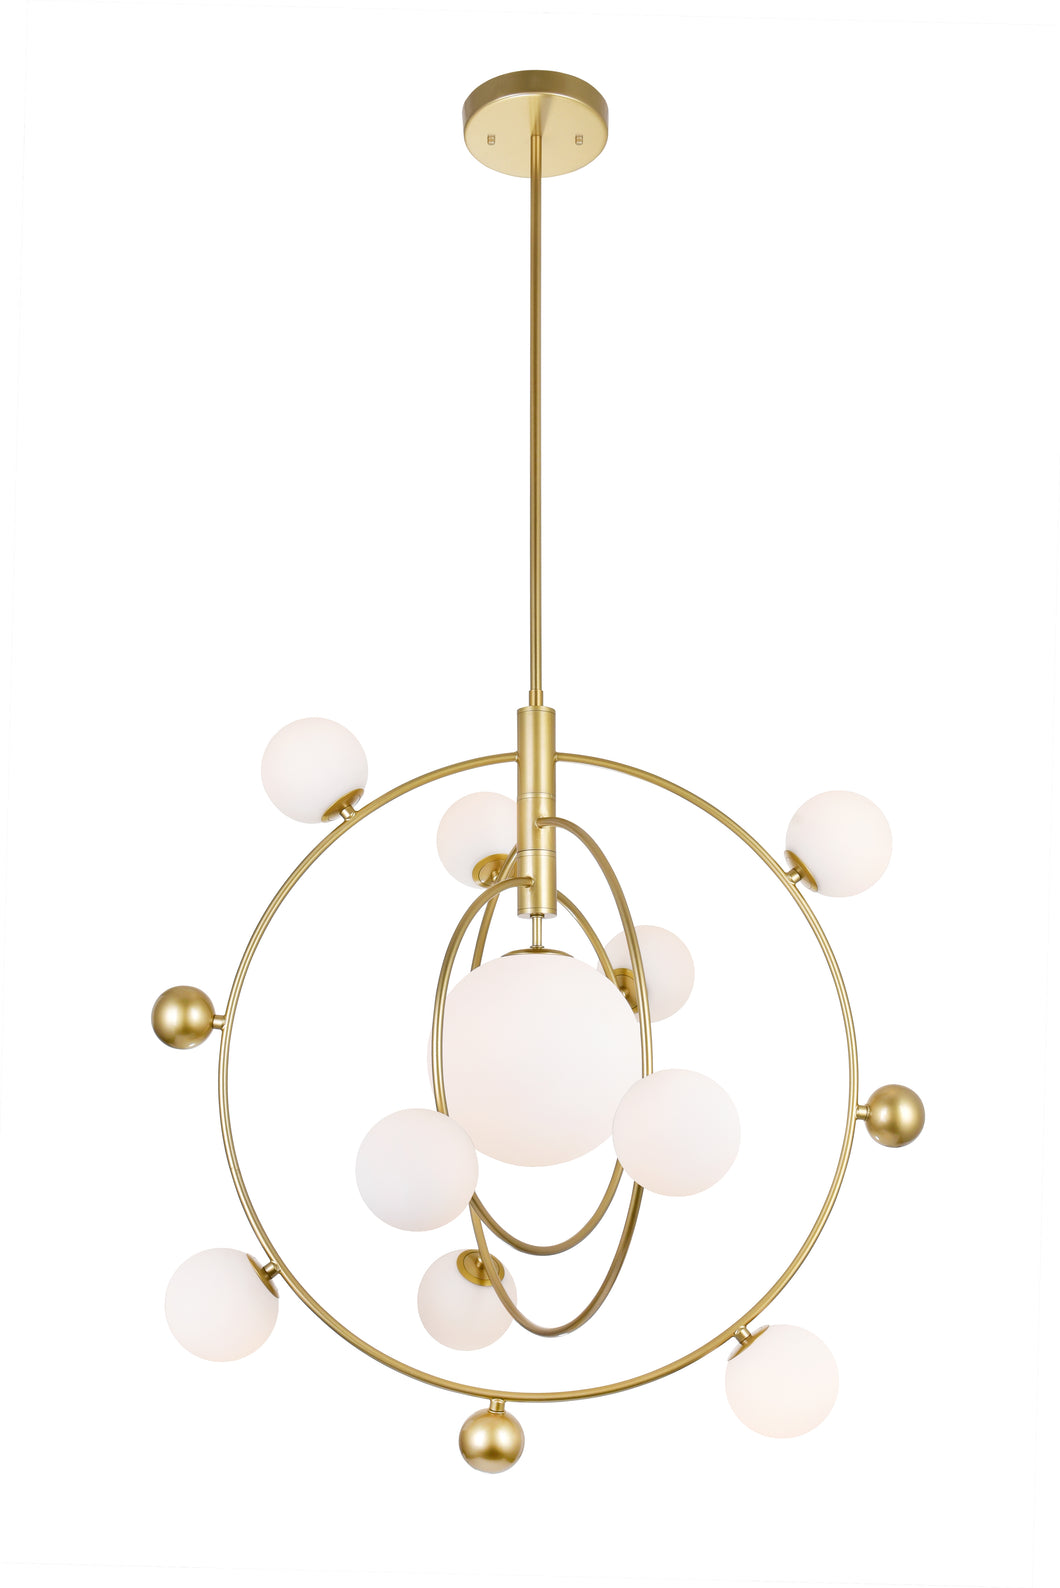 11 Light Chandelier with Medallion Gold Finish